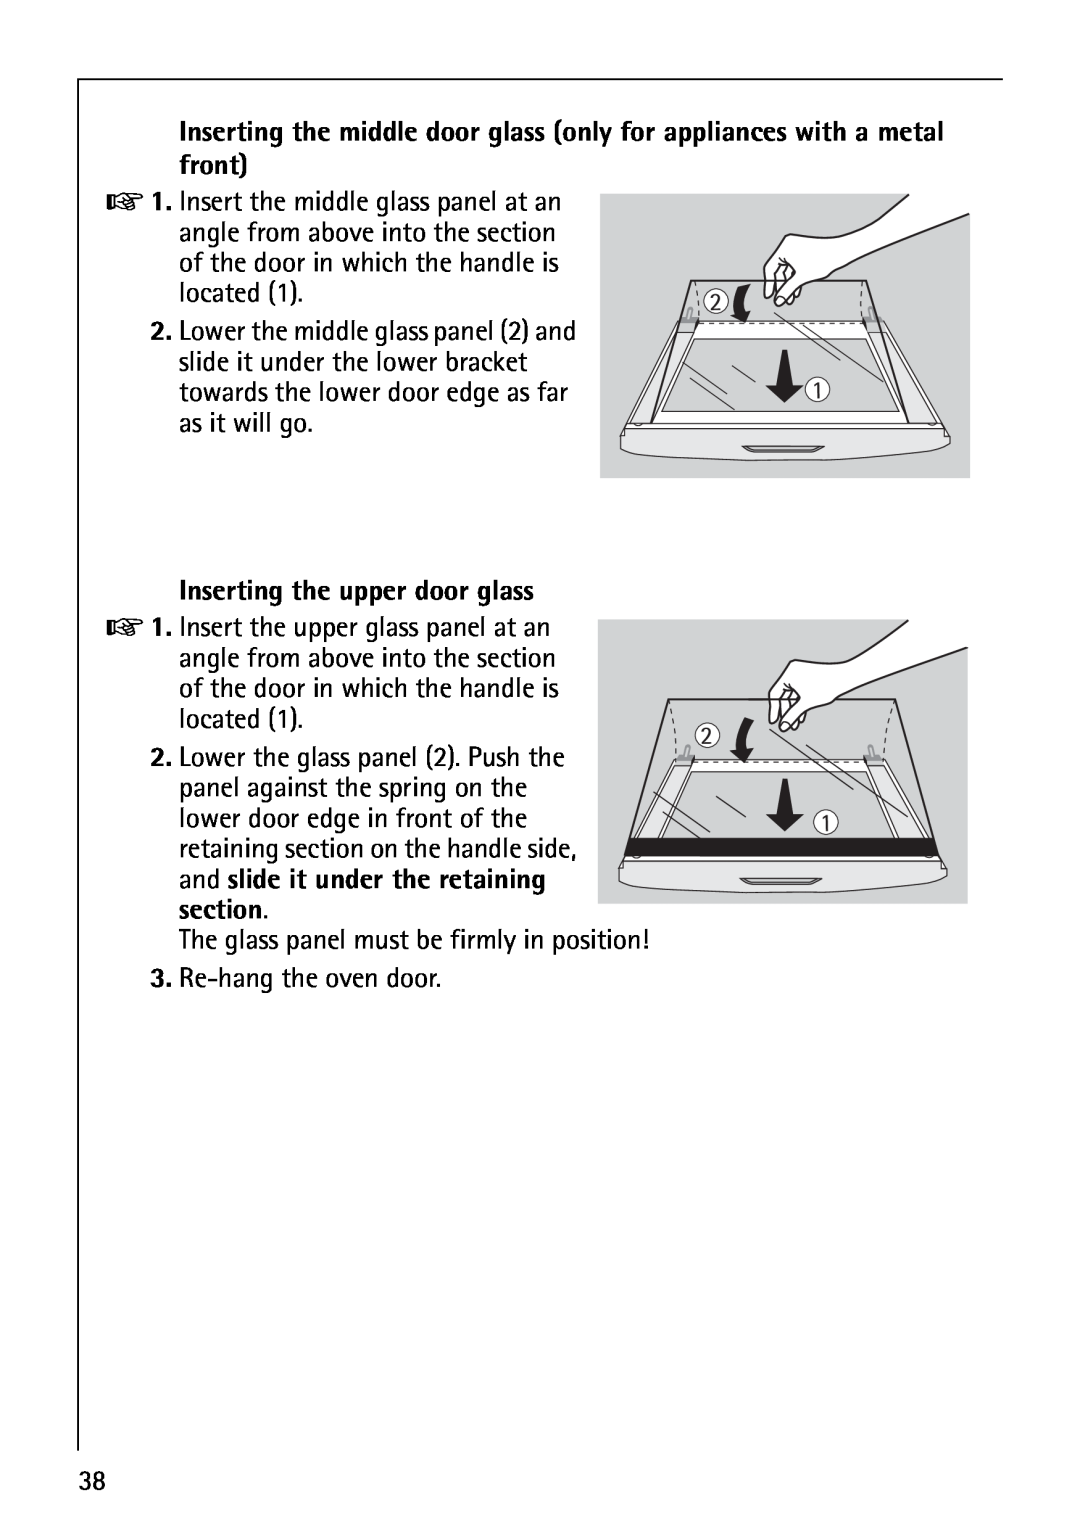 AEG E3000-1 manual Inserting the upper door glass, section 